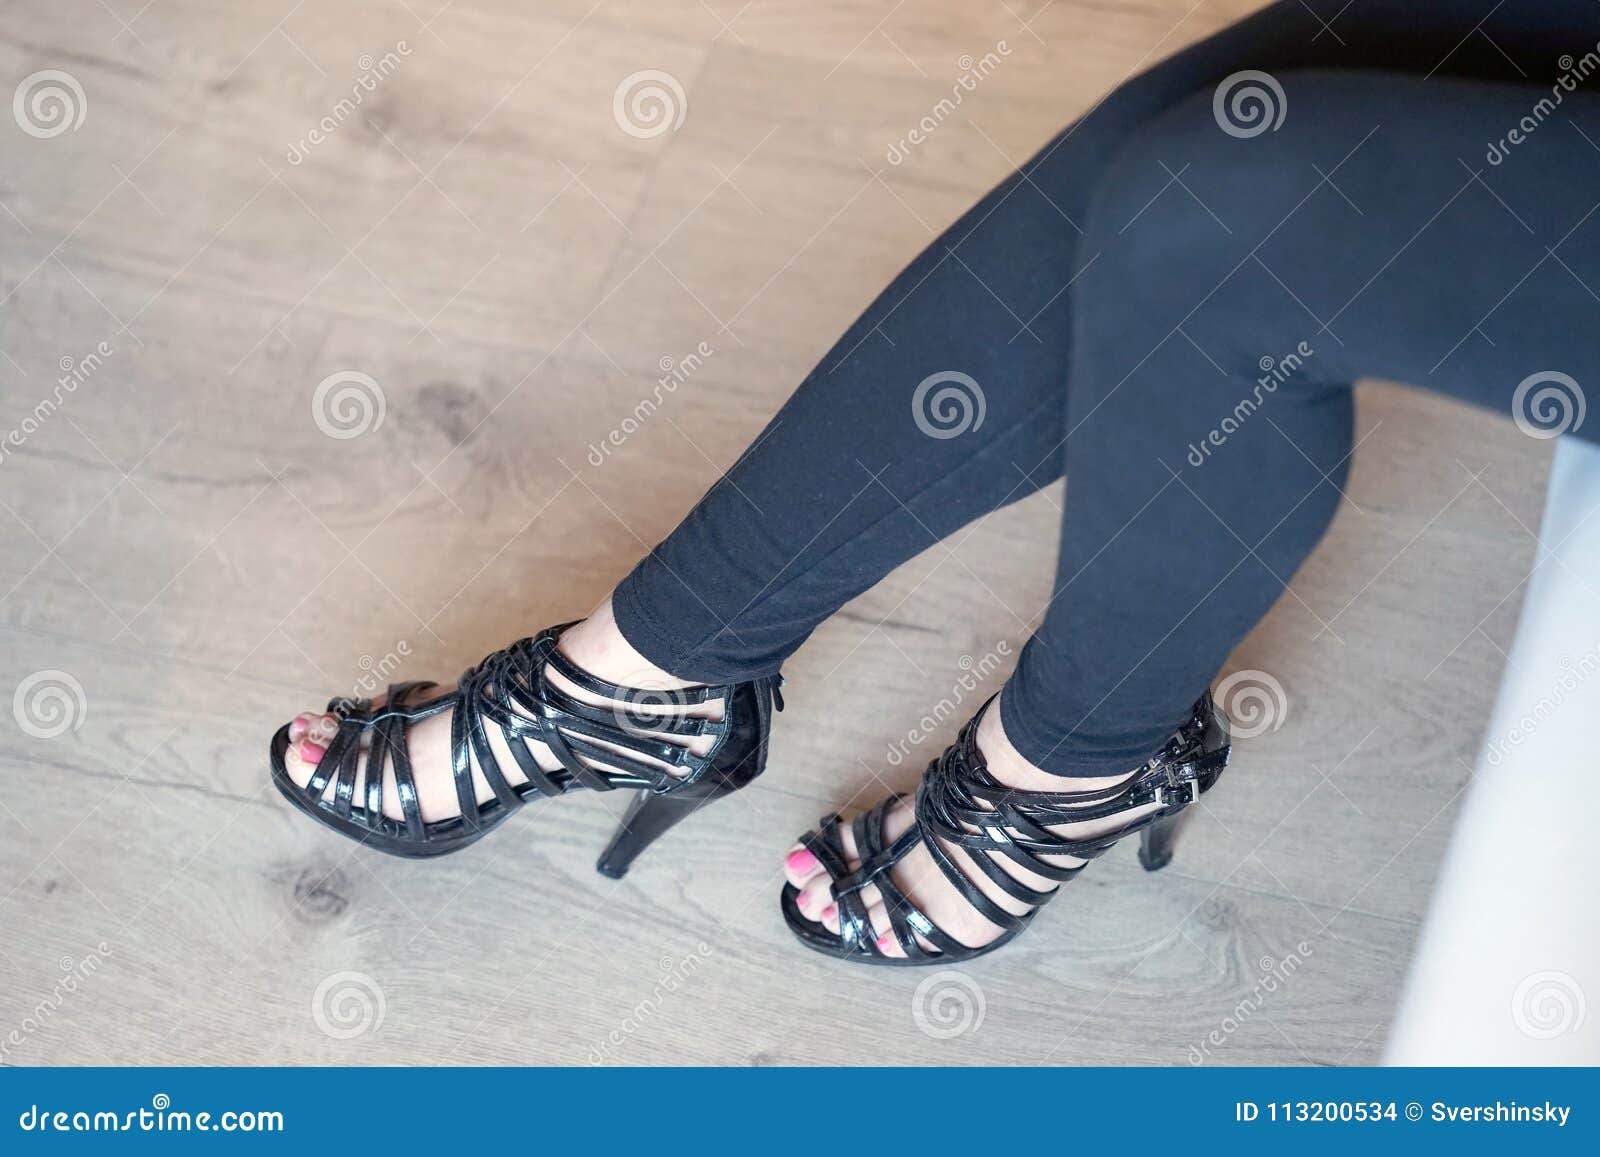 Female feet in black shoes stock photo. Image of lady - 113200534